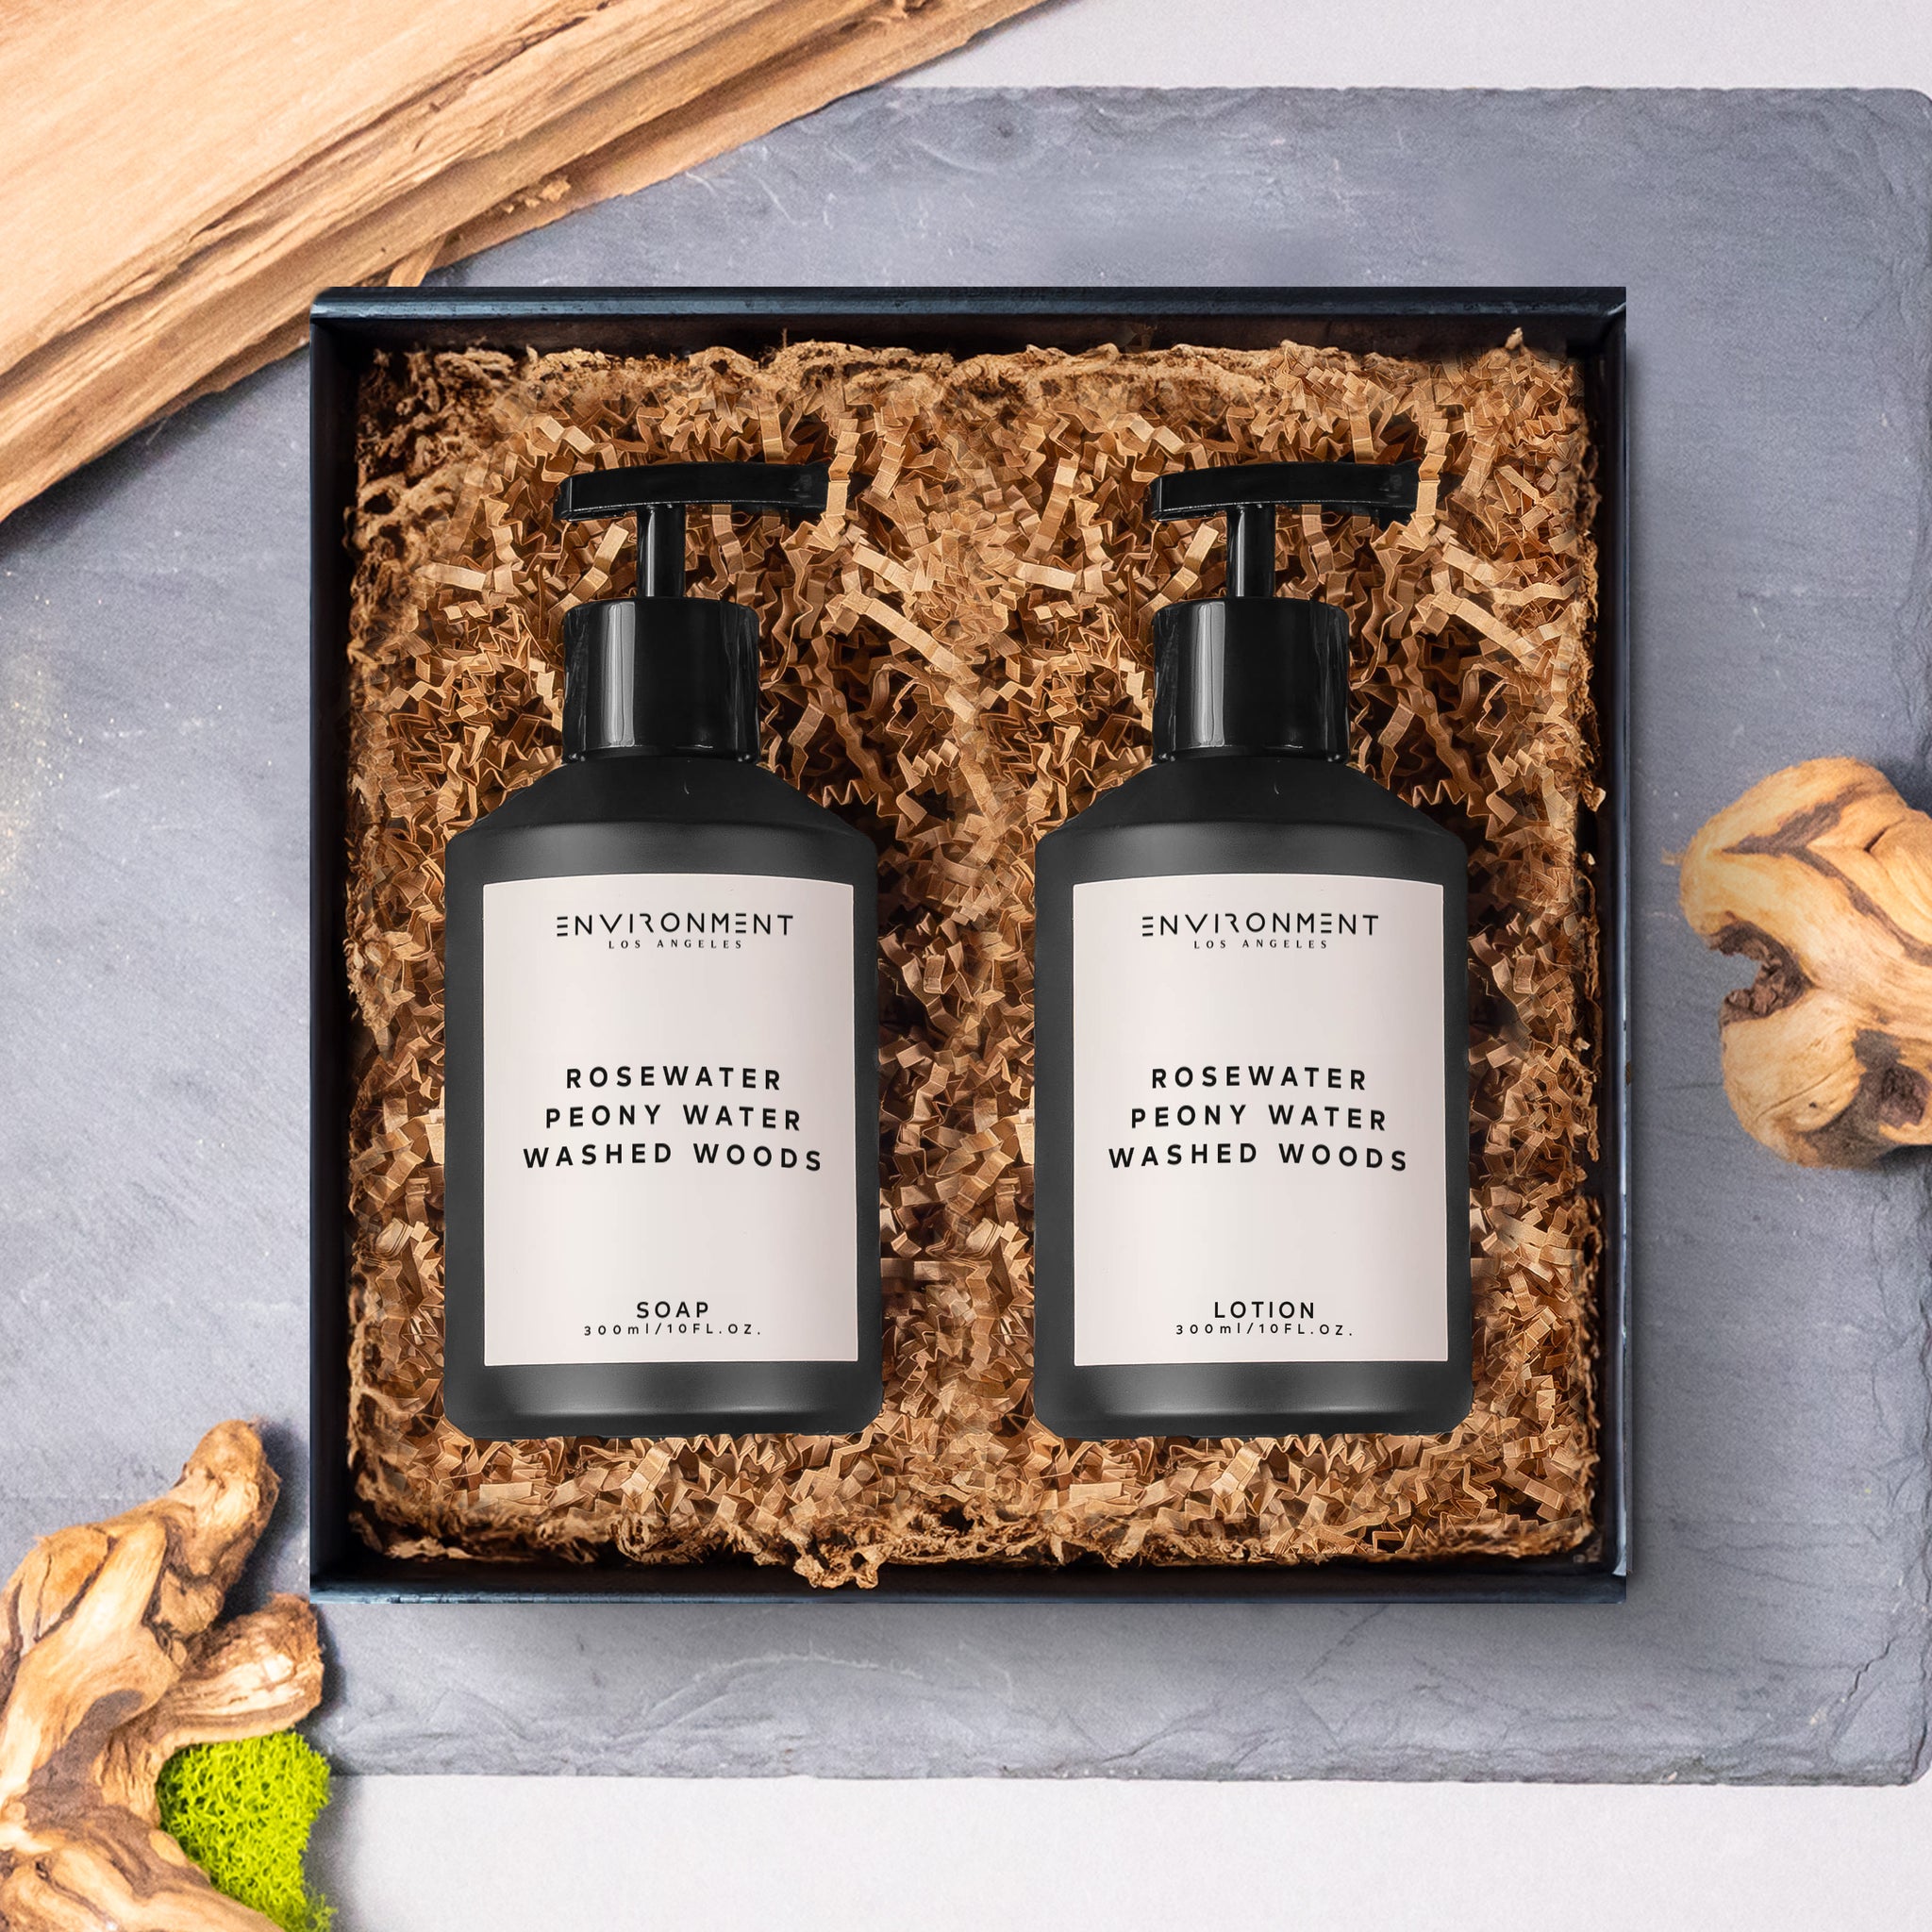 Rosewater | Peony Water | Washed Woods  300ml Hand Soap and 300ml Lotion Gift Pack (Inspired by Issey Miyake L'Eau d'Issey®)